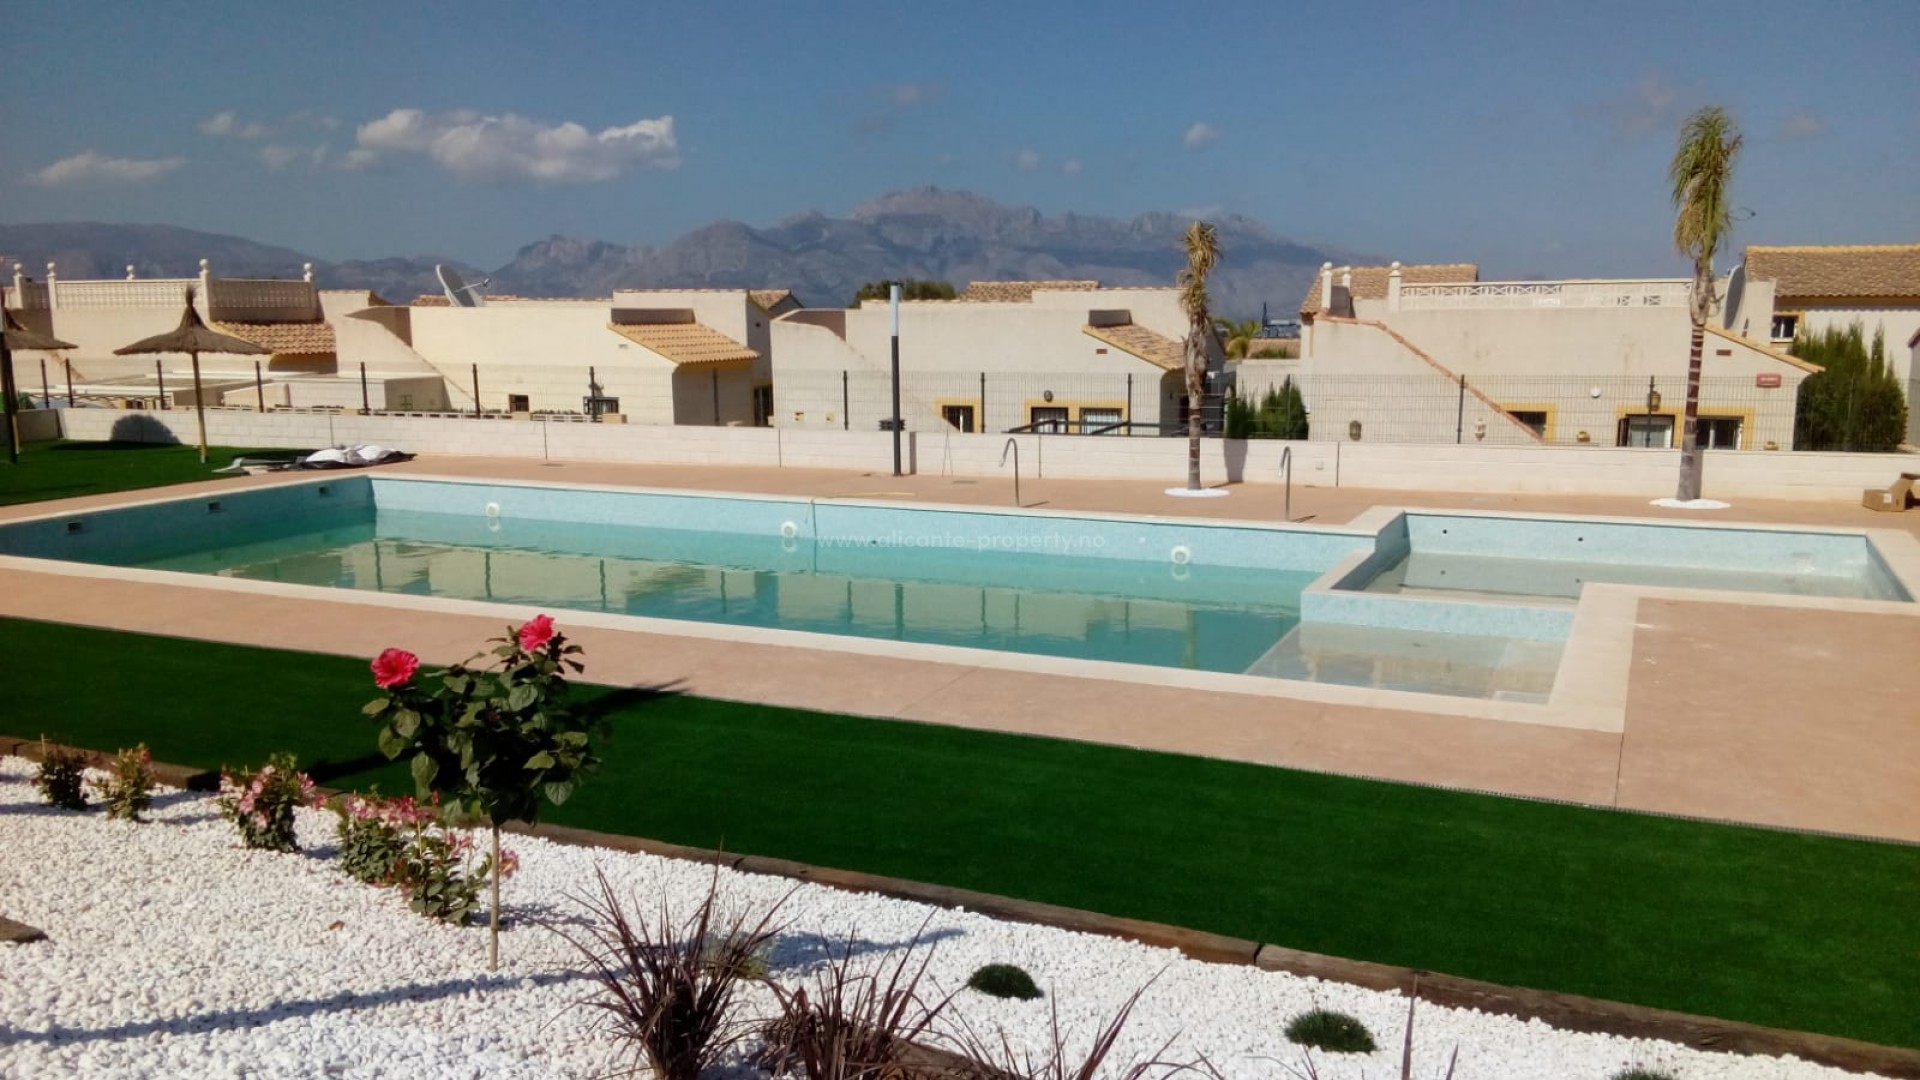 Bungalow in Polop. 2 bedrooms, 2 bathrooms. 5 min. to Benidorm and beach, terraces, views of the Mediterranean, fantastic garden, or upstairs with a solarium.